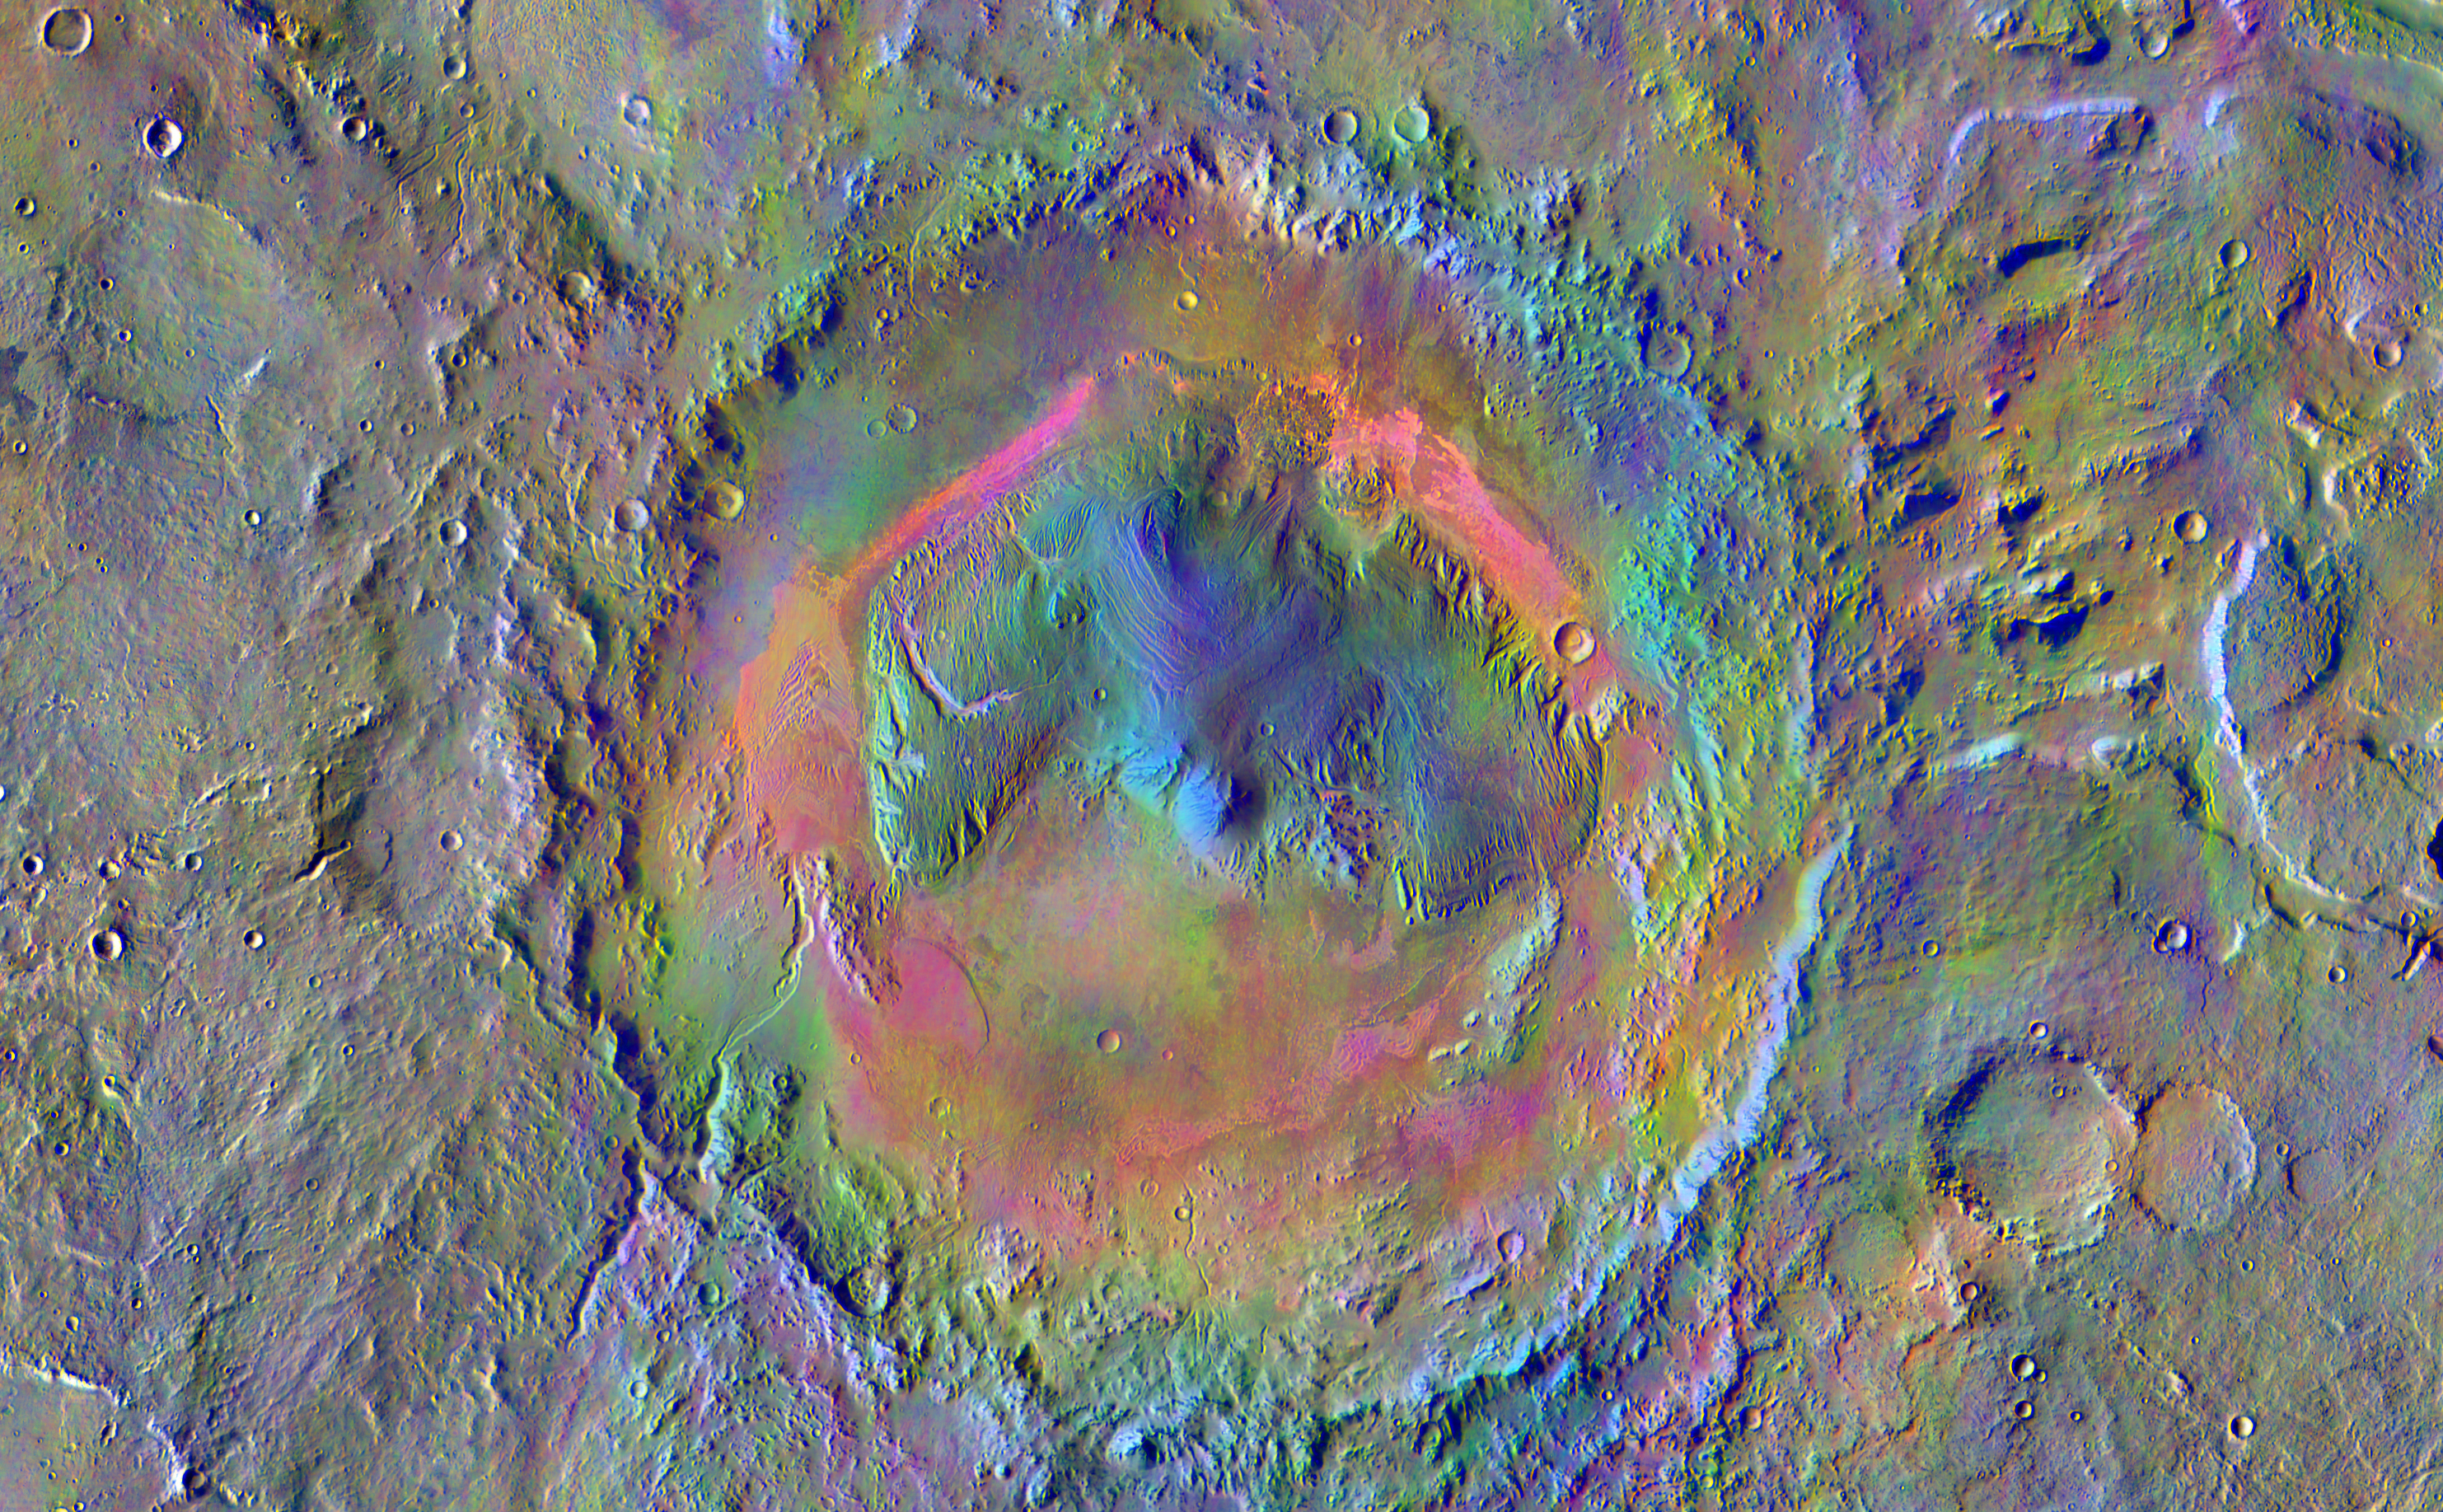 Gale Crater, home to NASA's Curiosity Mars rover, shows a new face in this image made using data from the THEMIS camera on NASA's Mars Odyssey orbiter.